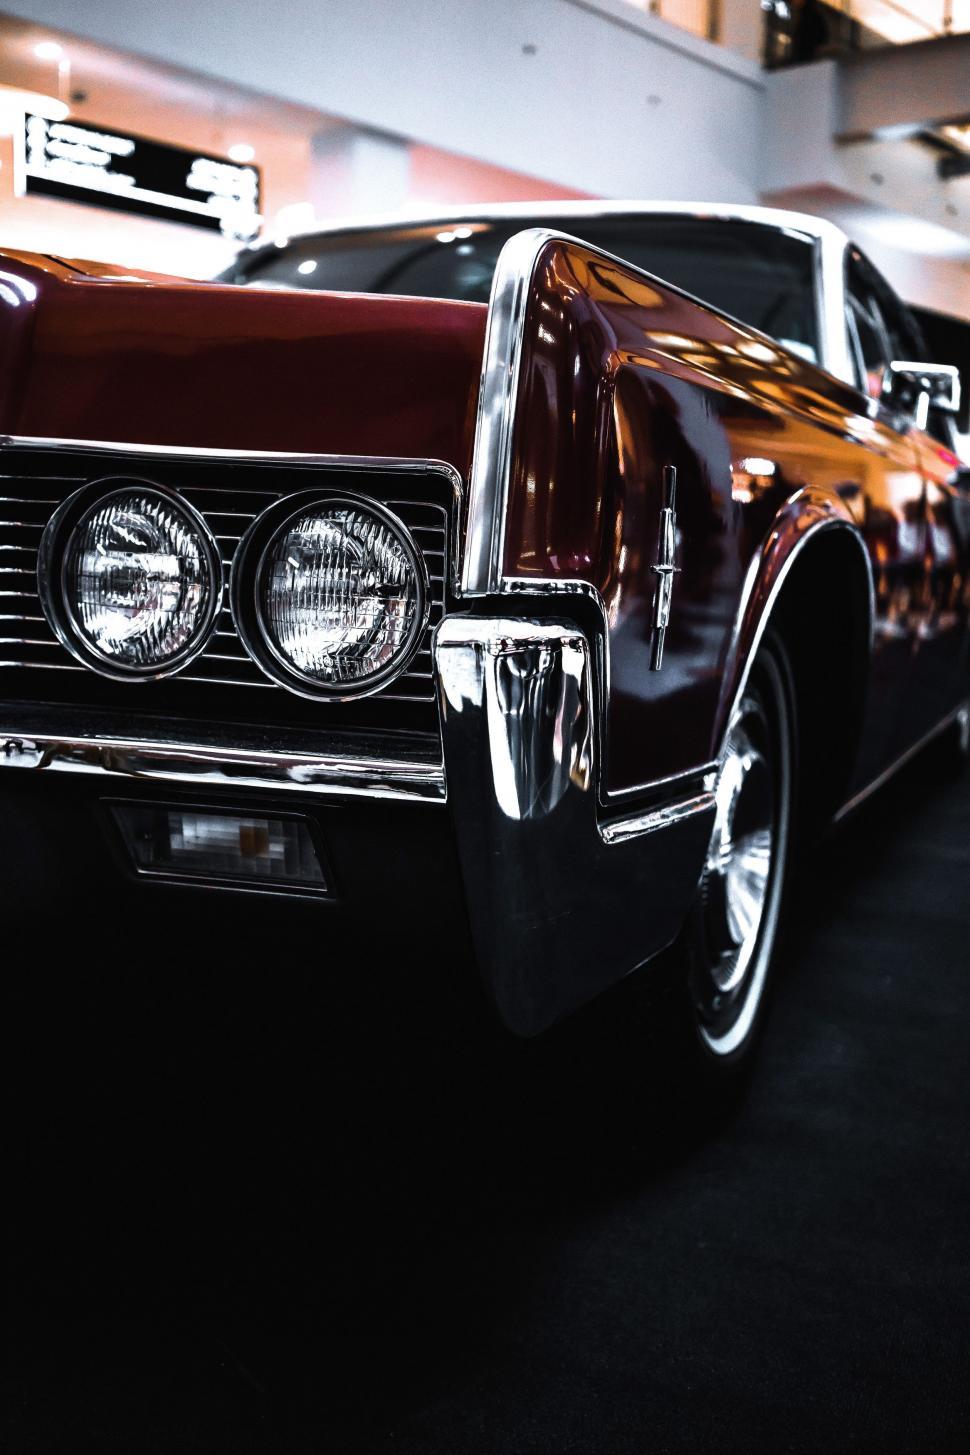 Free Image of Classic Car Parked in Garage 